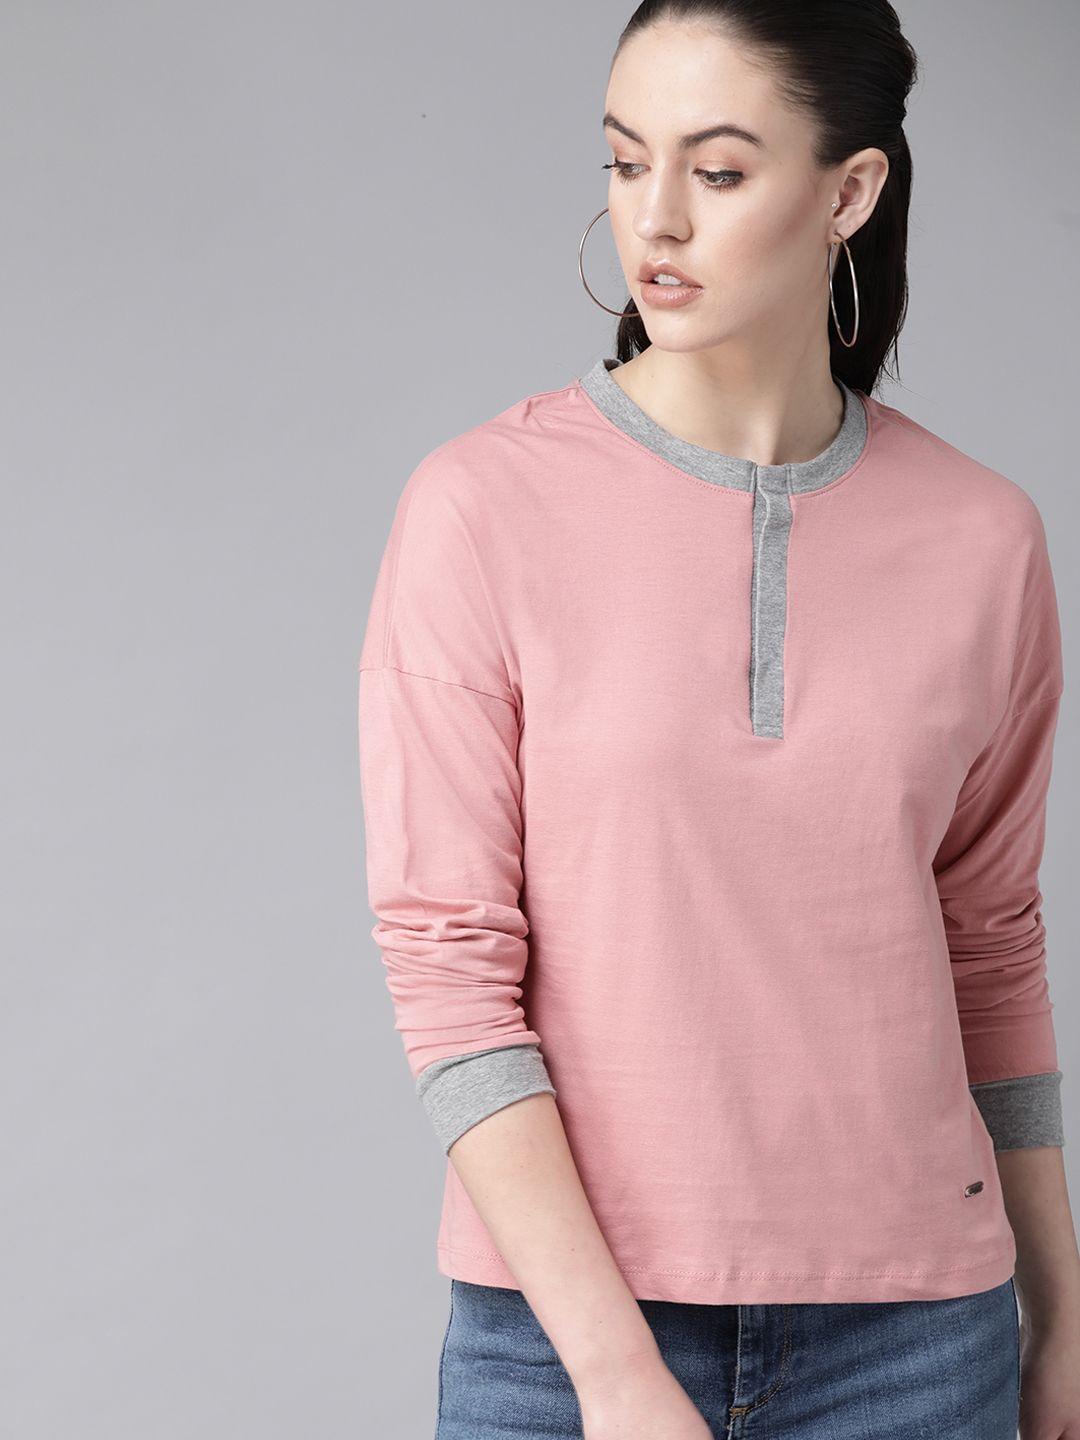 the roadster lifestyle co women dusty pink solid henley neck pure cotton t-shirt